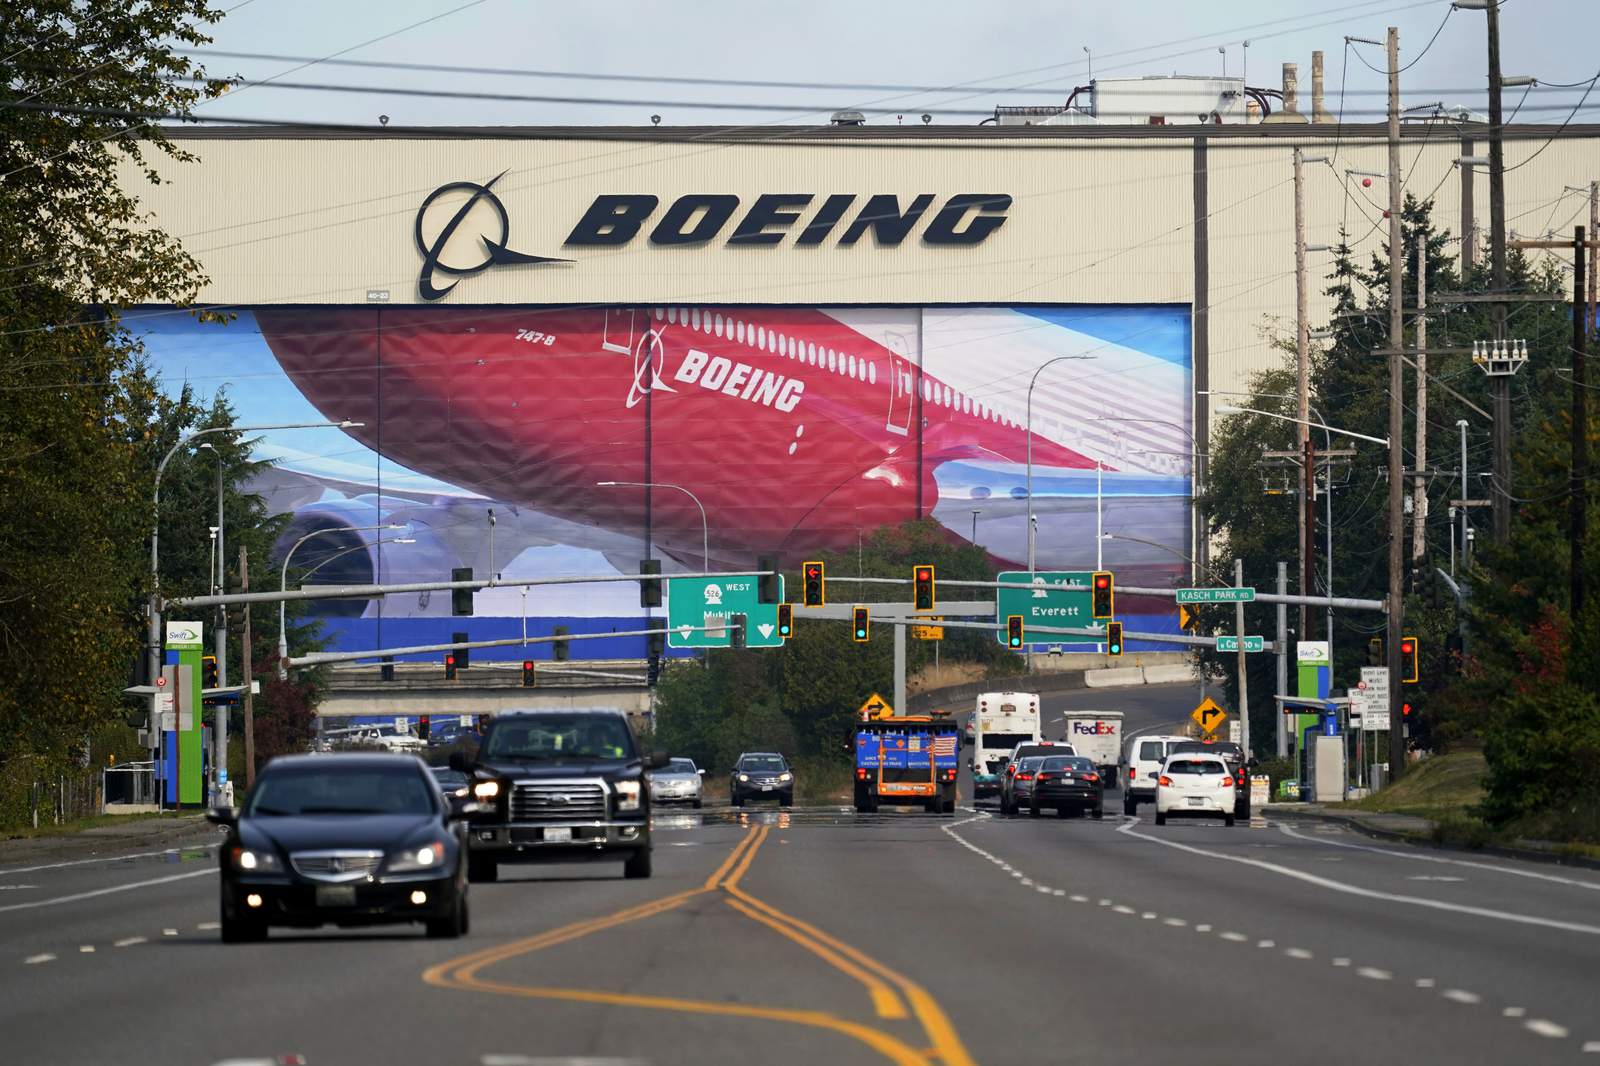 Boeing picks South Carolina over Seattle for 787 production